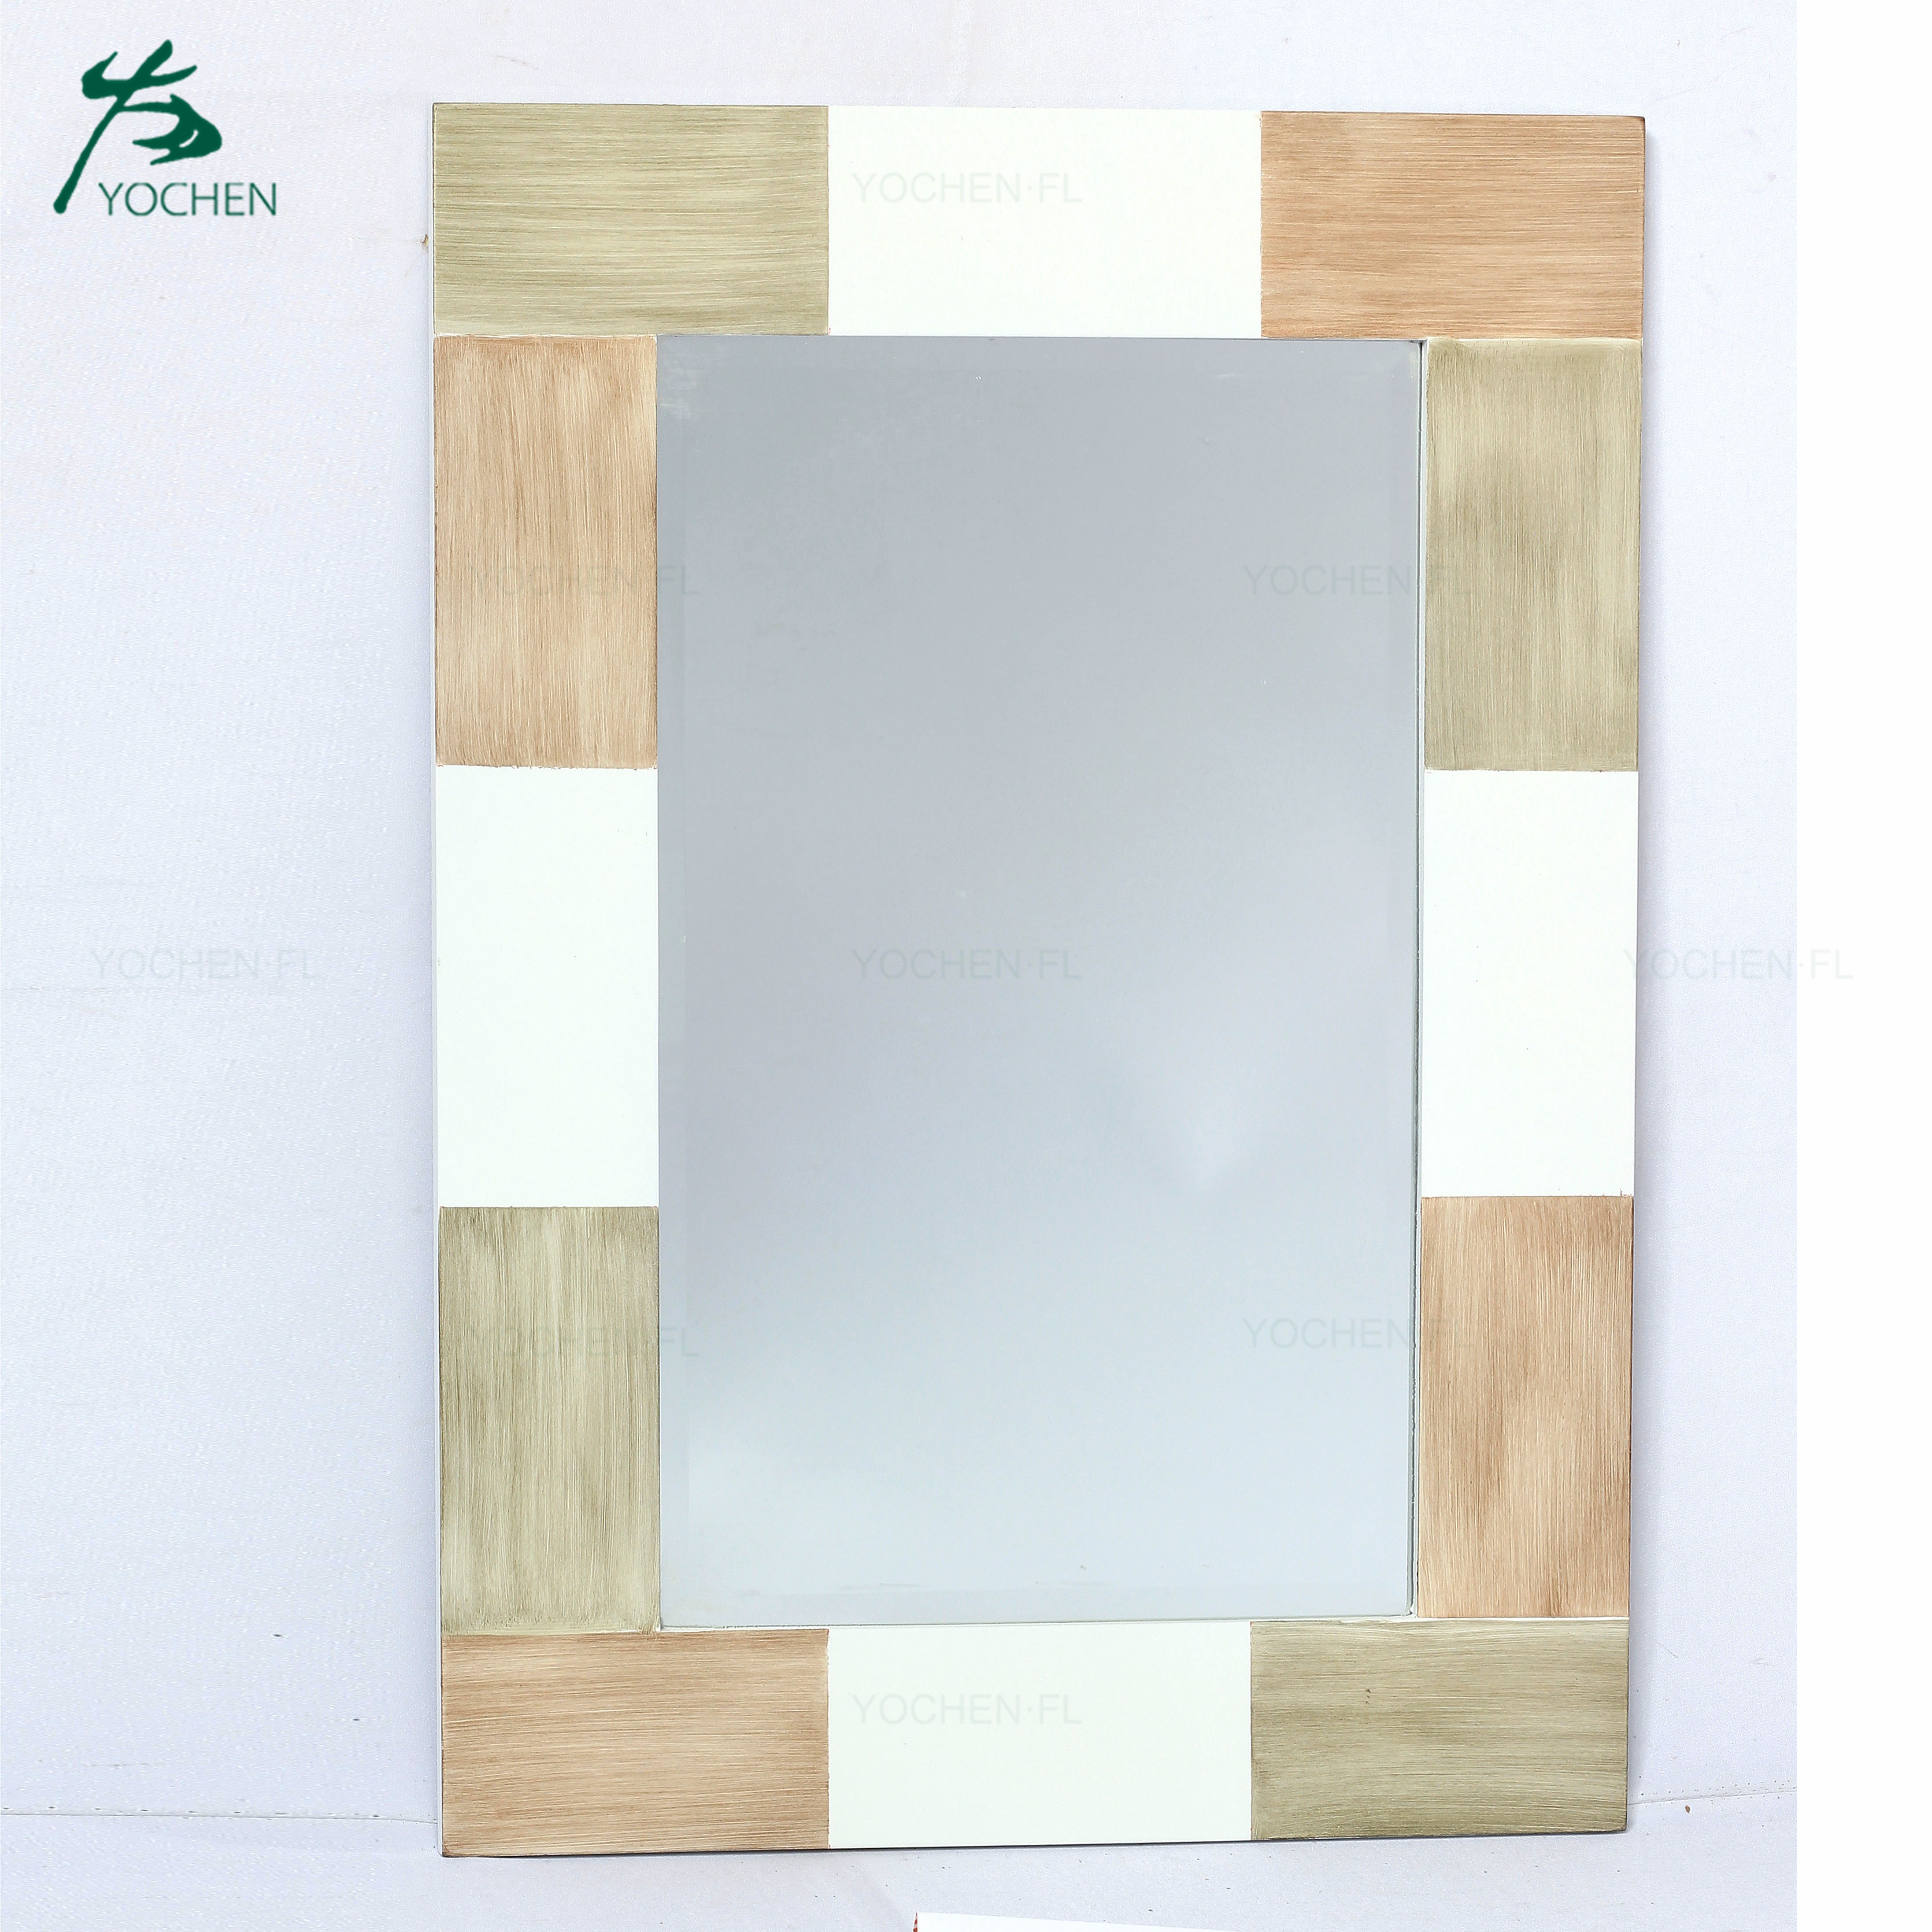 shabby chic home decor decorative wooden frame wall mirror